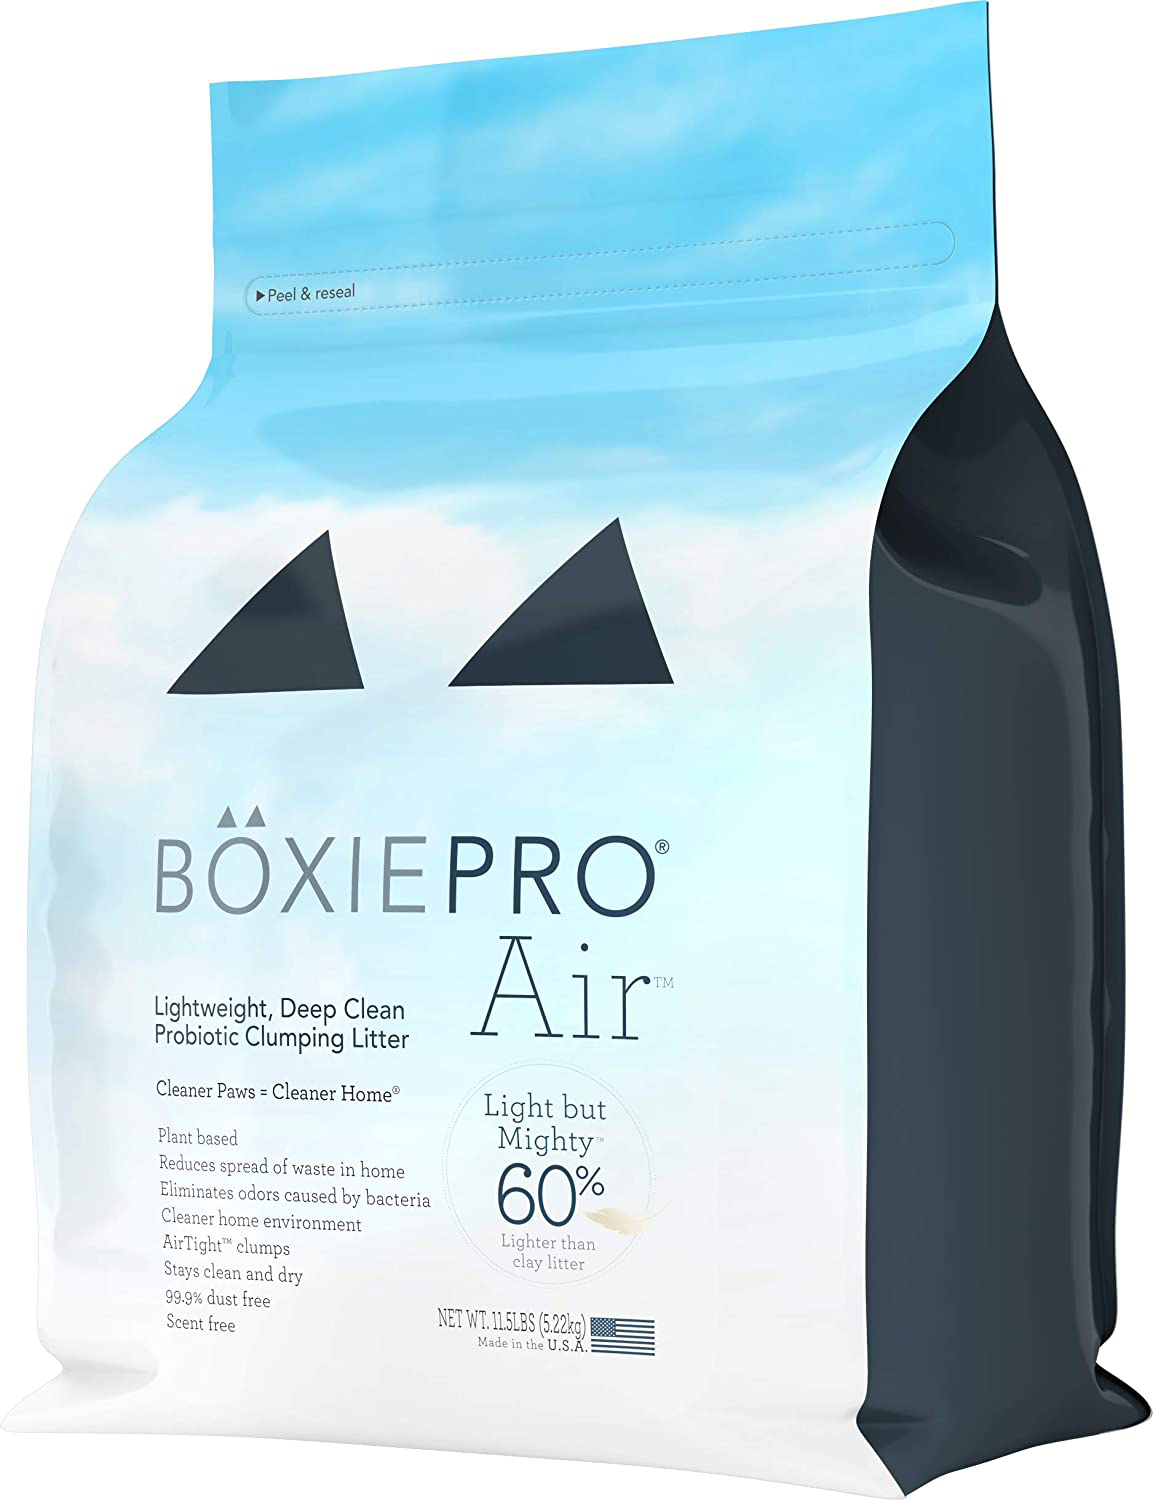 Boxiepro Air Lightweight, Deep Clean, Scent Free, Hard Clumping Cat Litter - Plant-Based Formula - Cleaner Home - Ultra Clean Litter Box, Probiotic Powered Odor Control, 99.9% Dust Free Animals & Pet Supplies > Pet Supplies > Cat Supplies > Cat Litter Boxiecat 11.5 Pound (Pack of 1)  